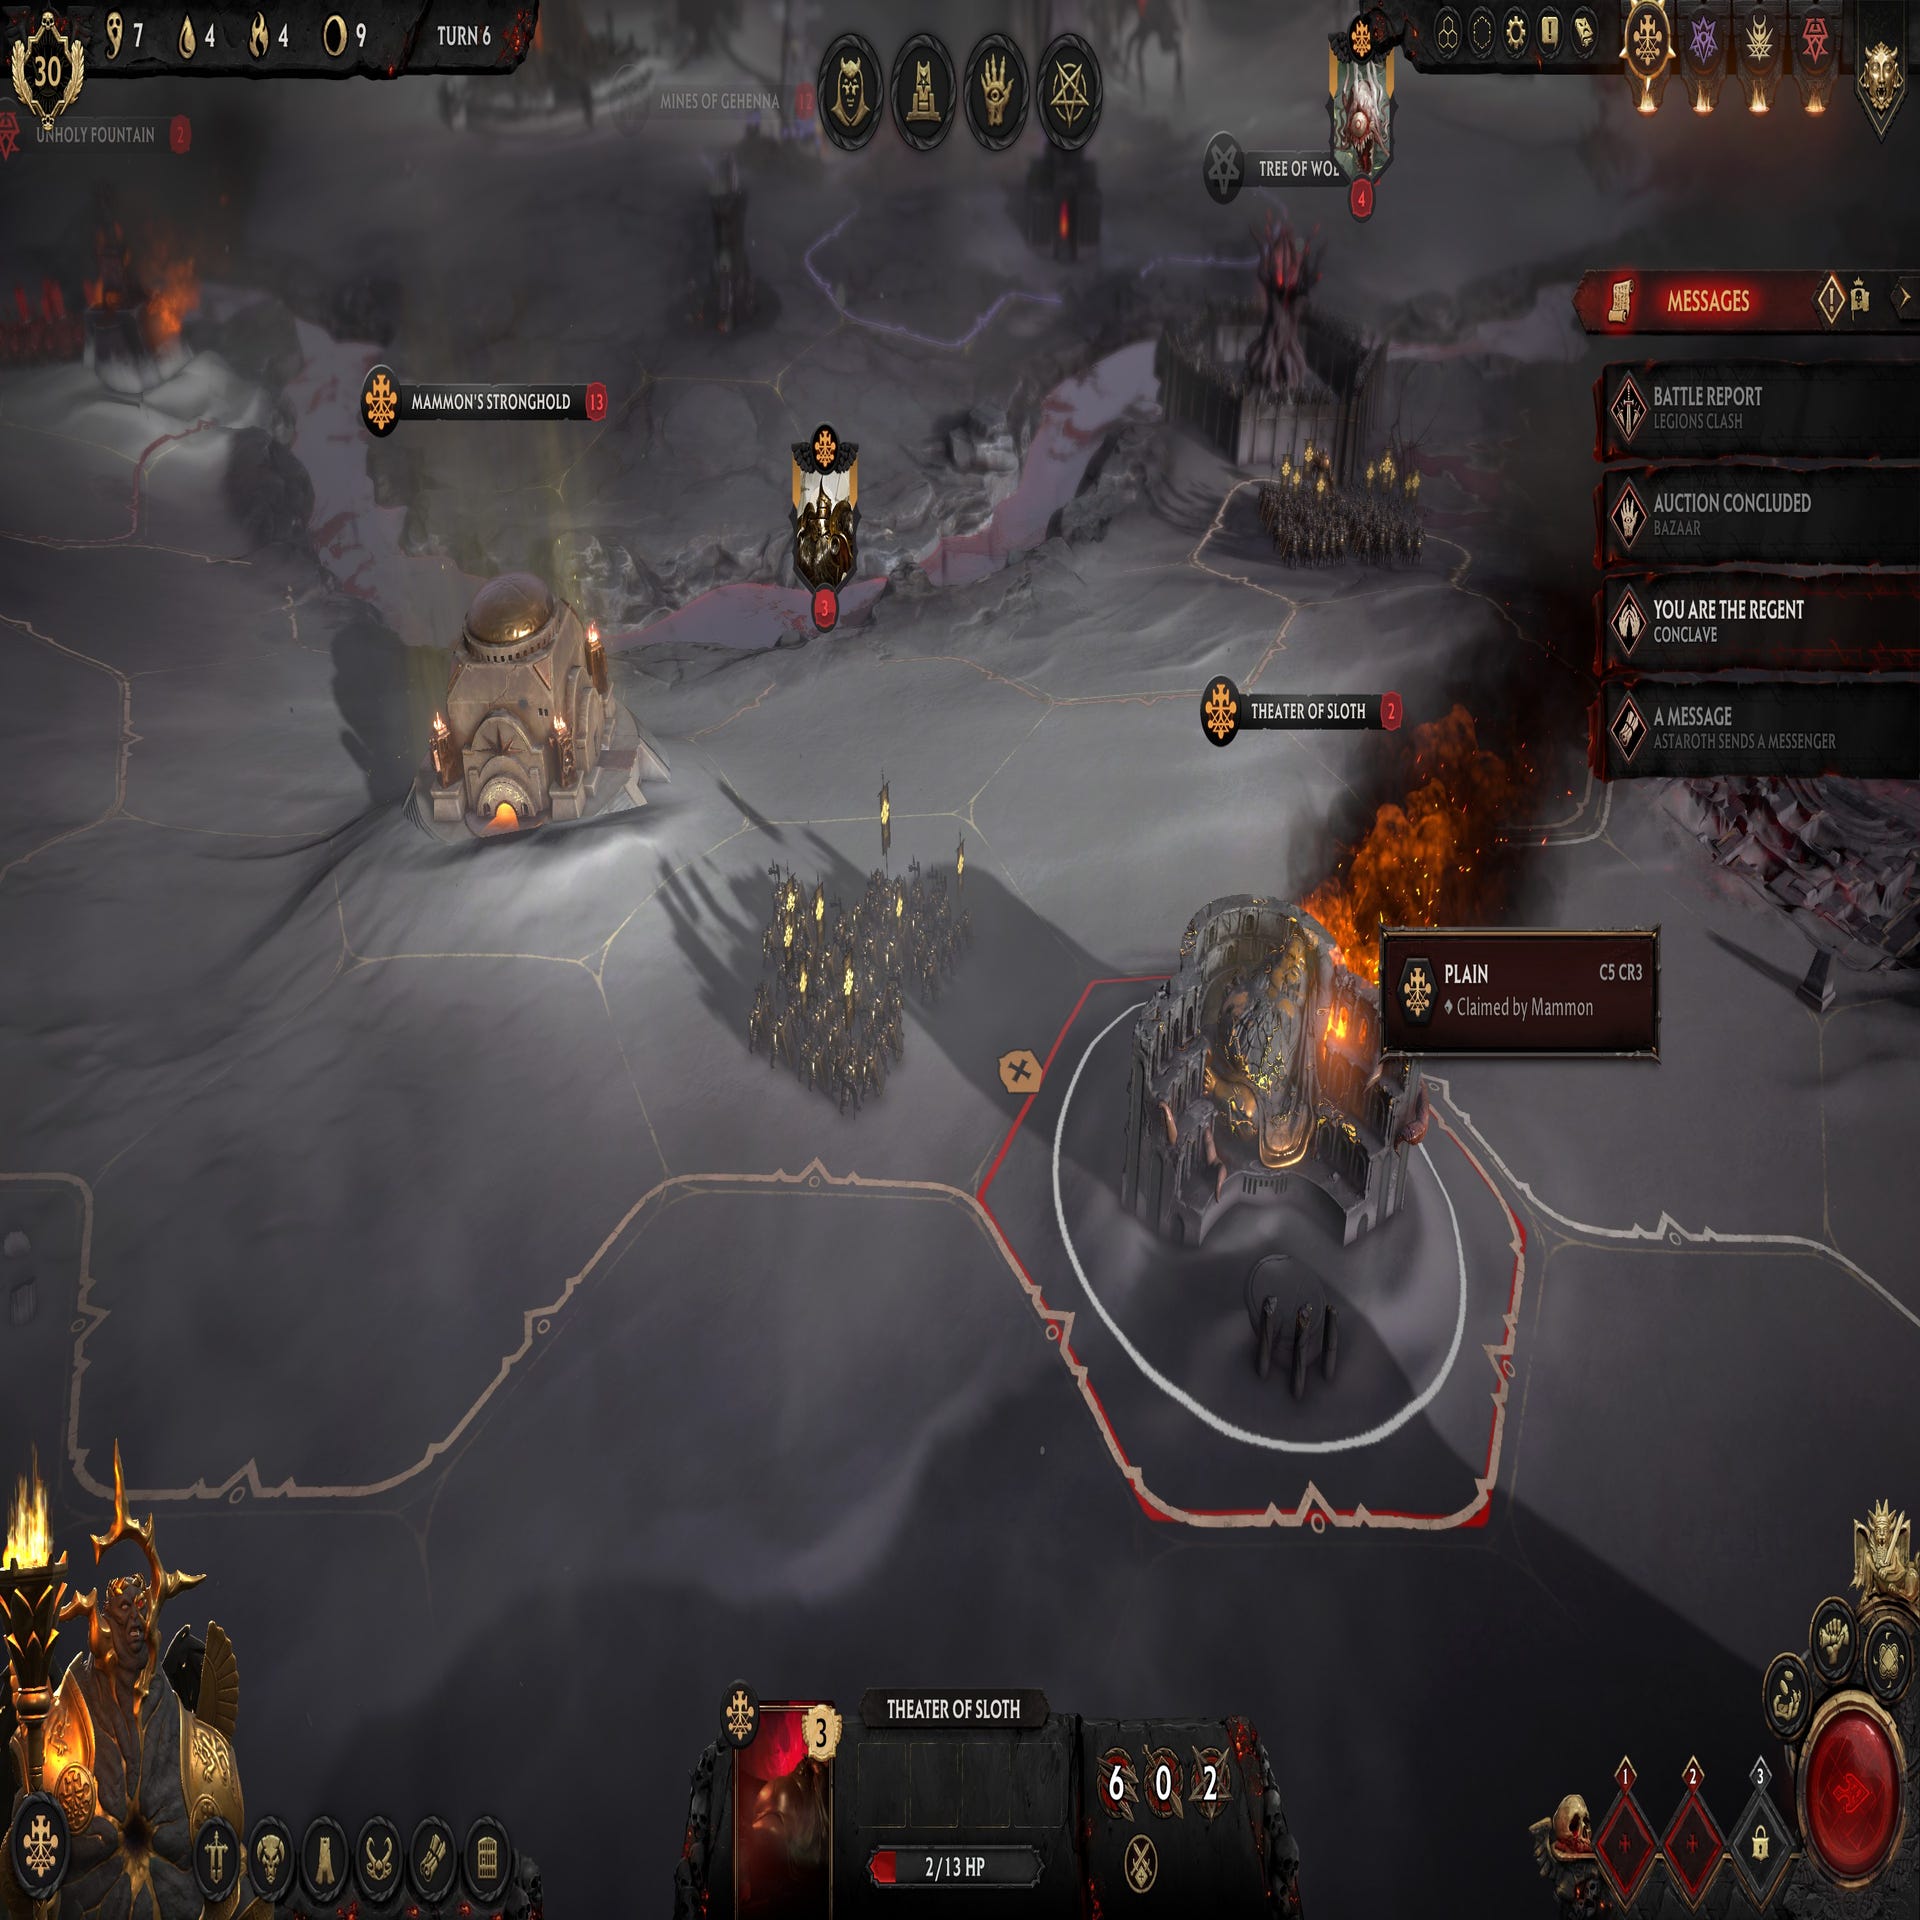 Solim Infernum (PC) Game Review - Characters and Storyline